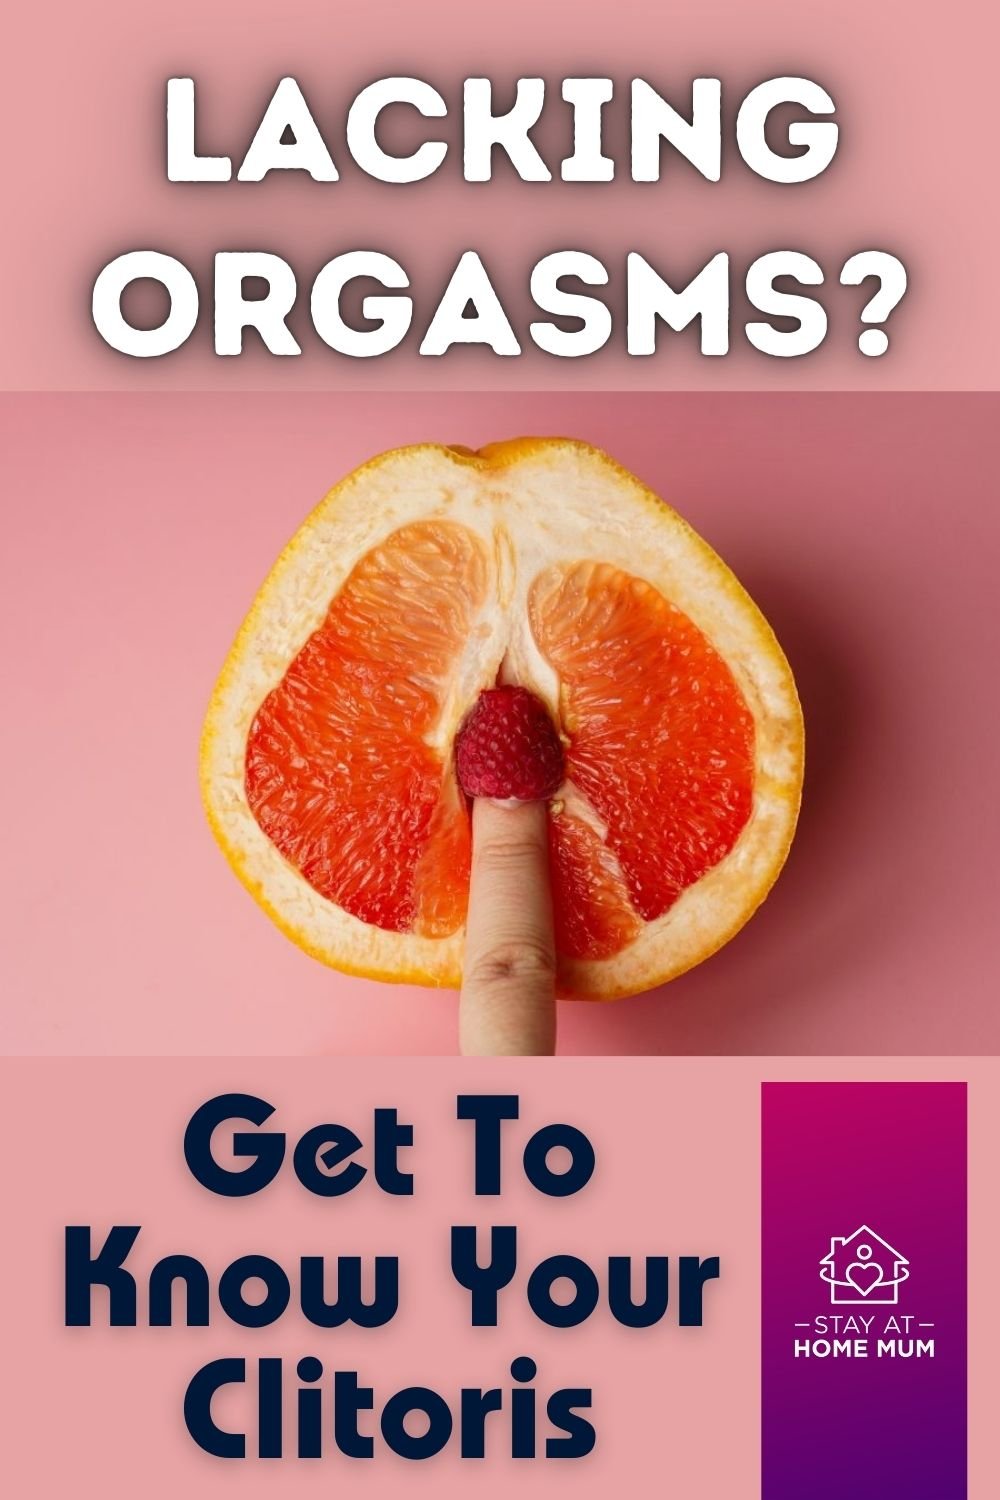 Lacking Orgasms? Get to know your Clitoris Pinnable